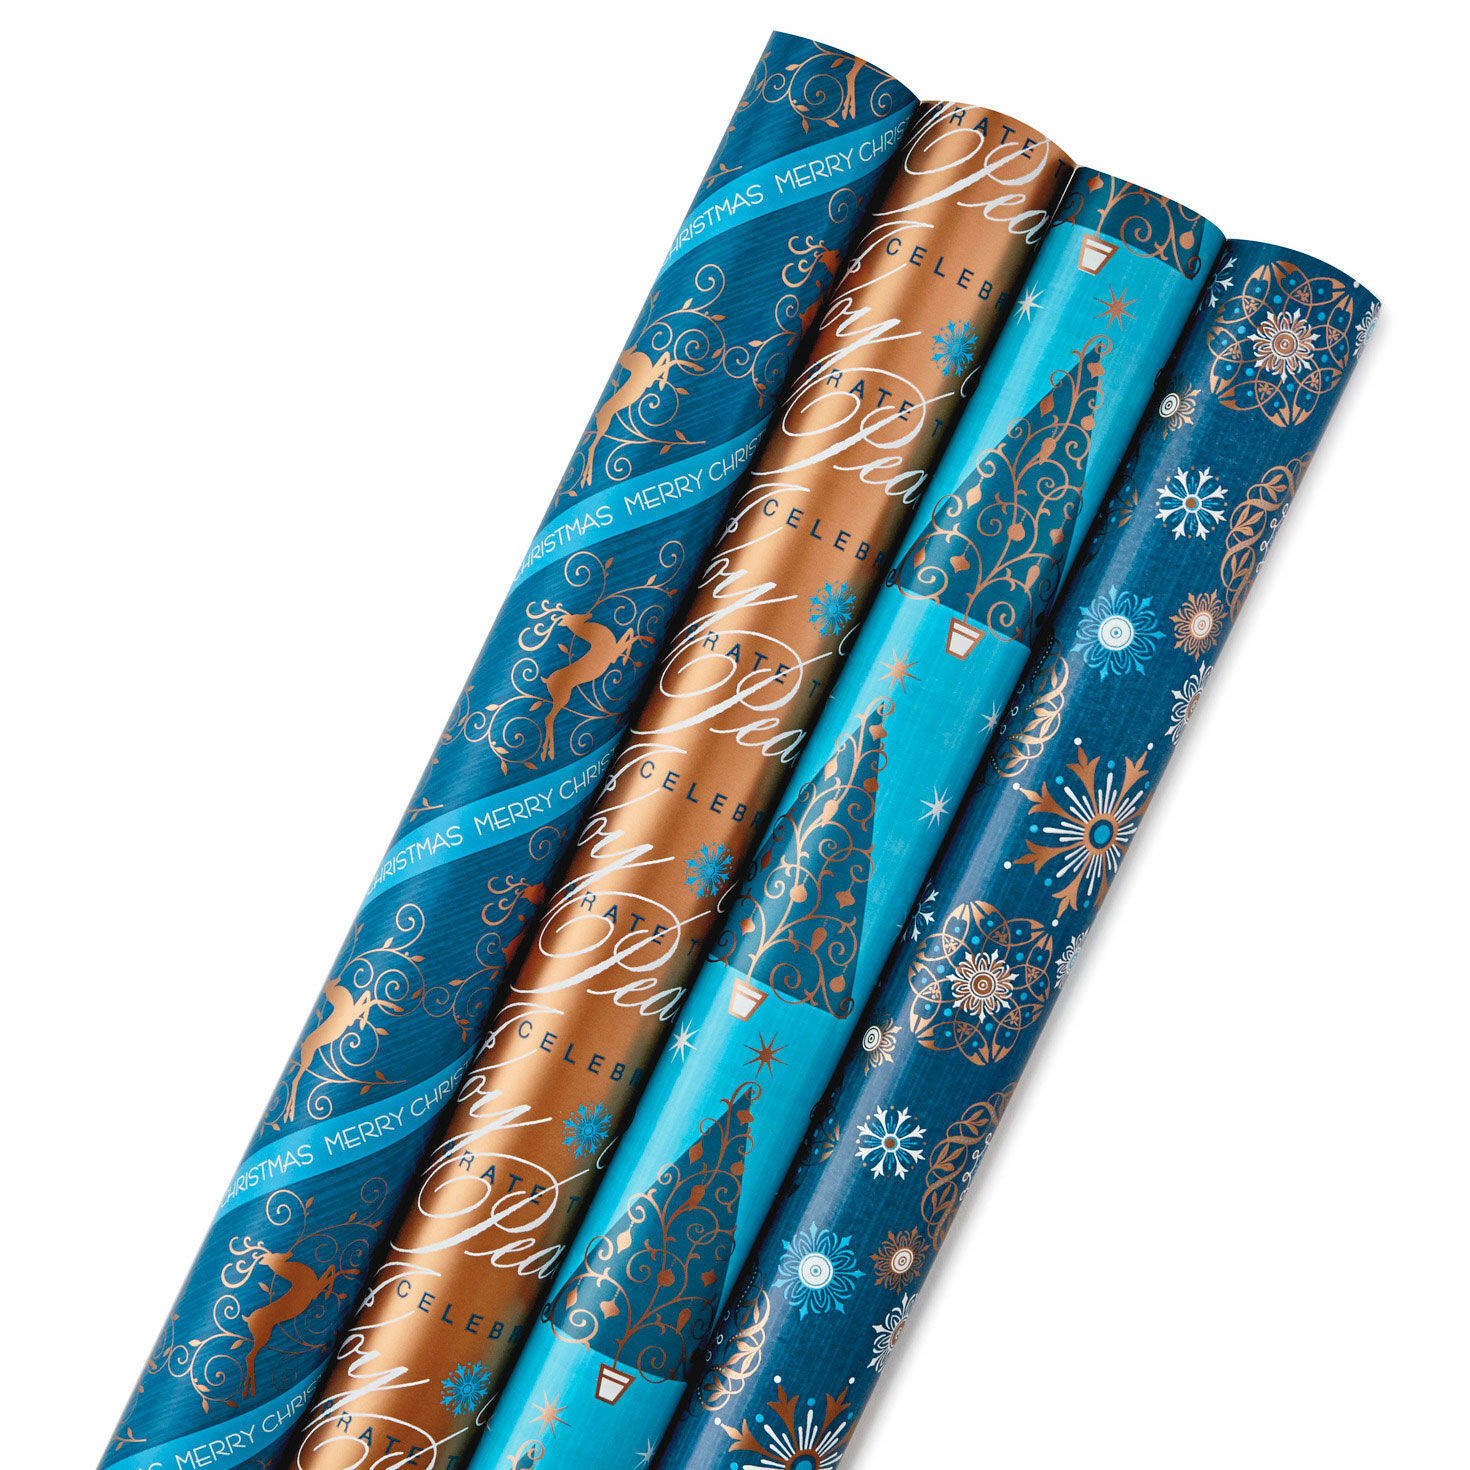 Hallmark Blue Holiday Wrapping Paper - Christmas Trees and Deer,  Snowflakes, Peace and Joy